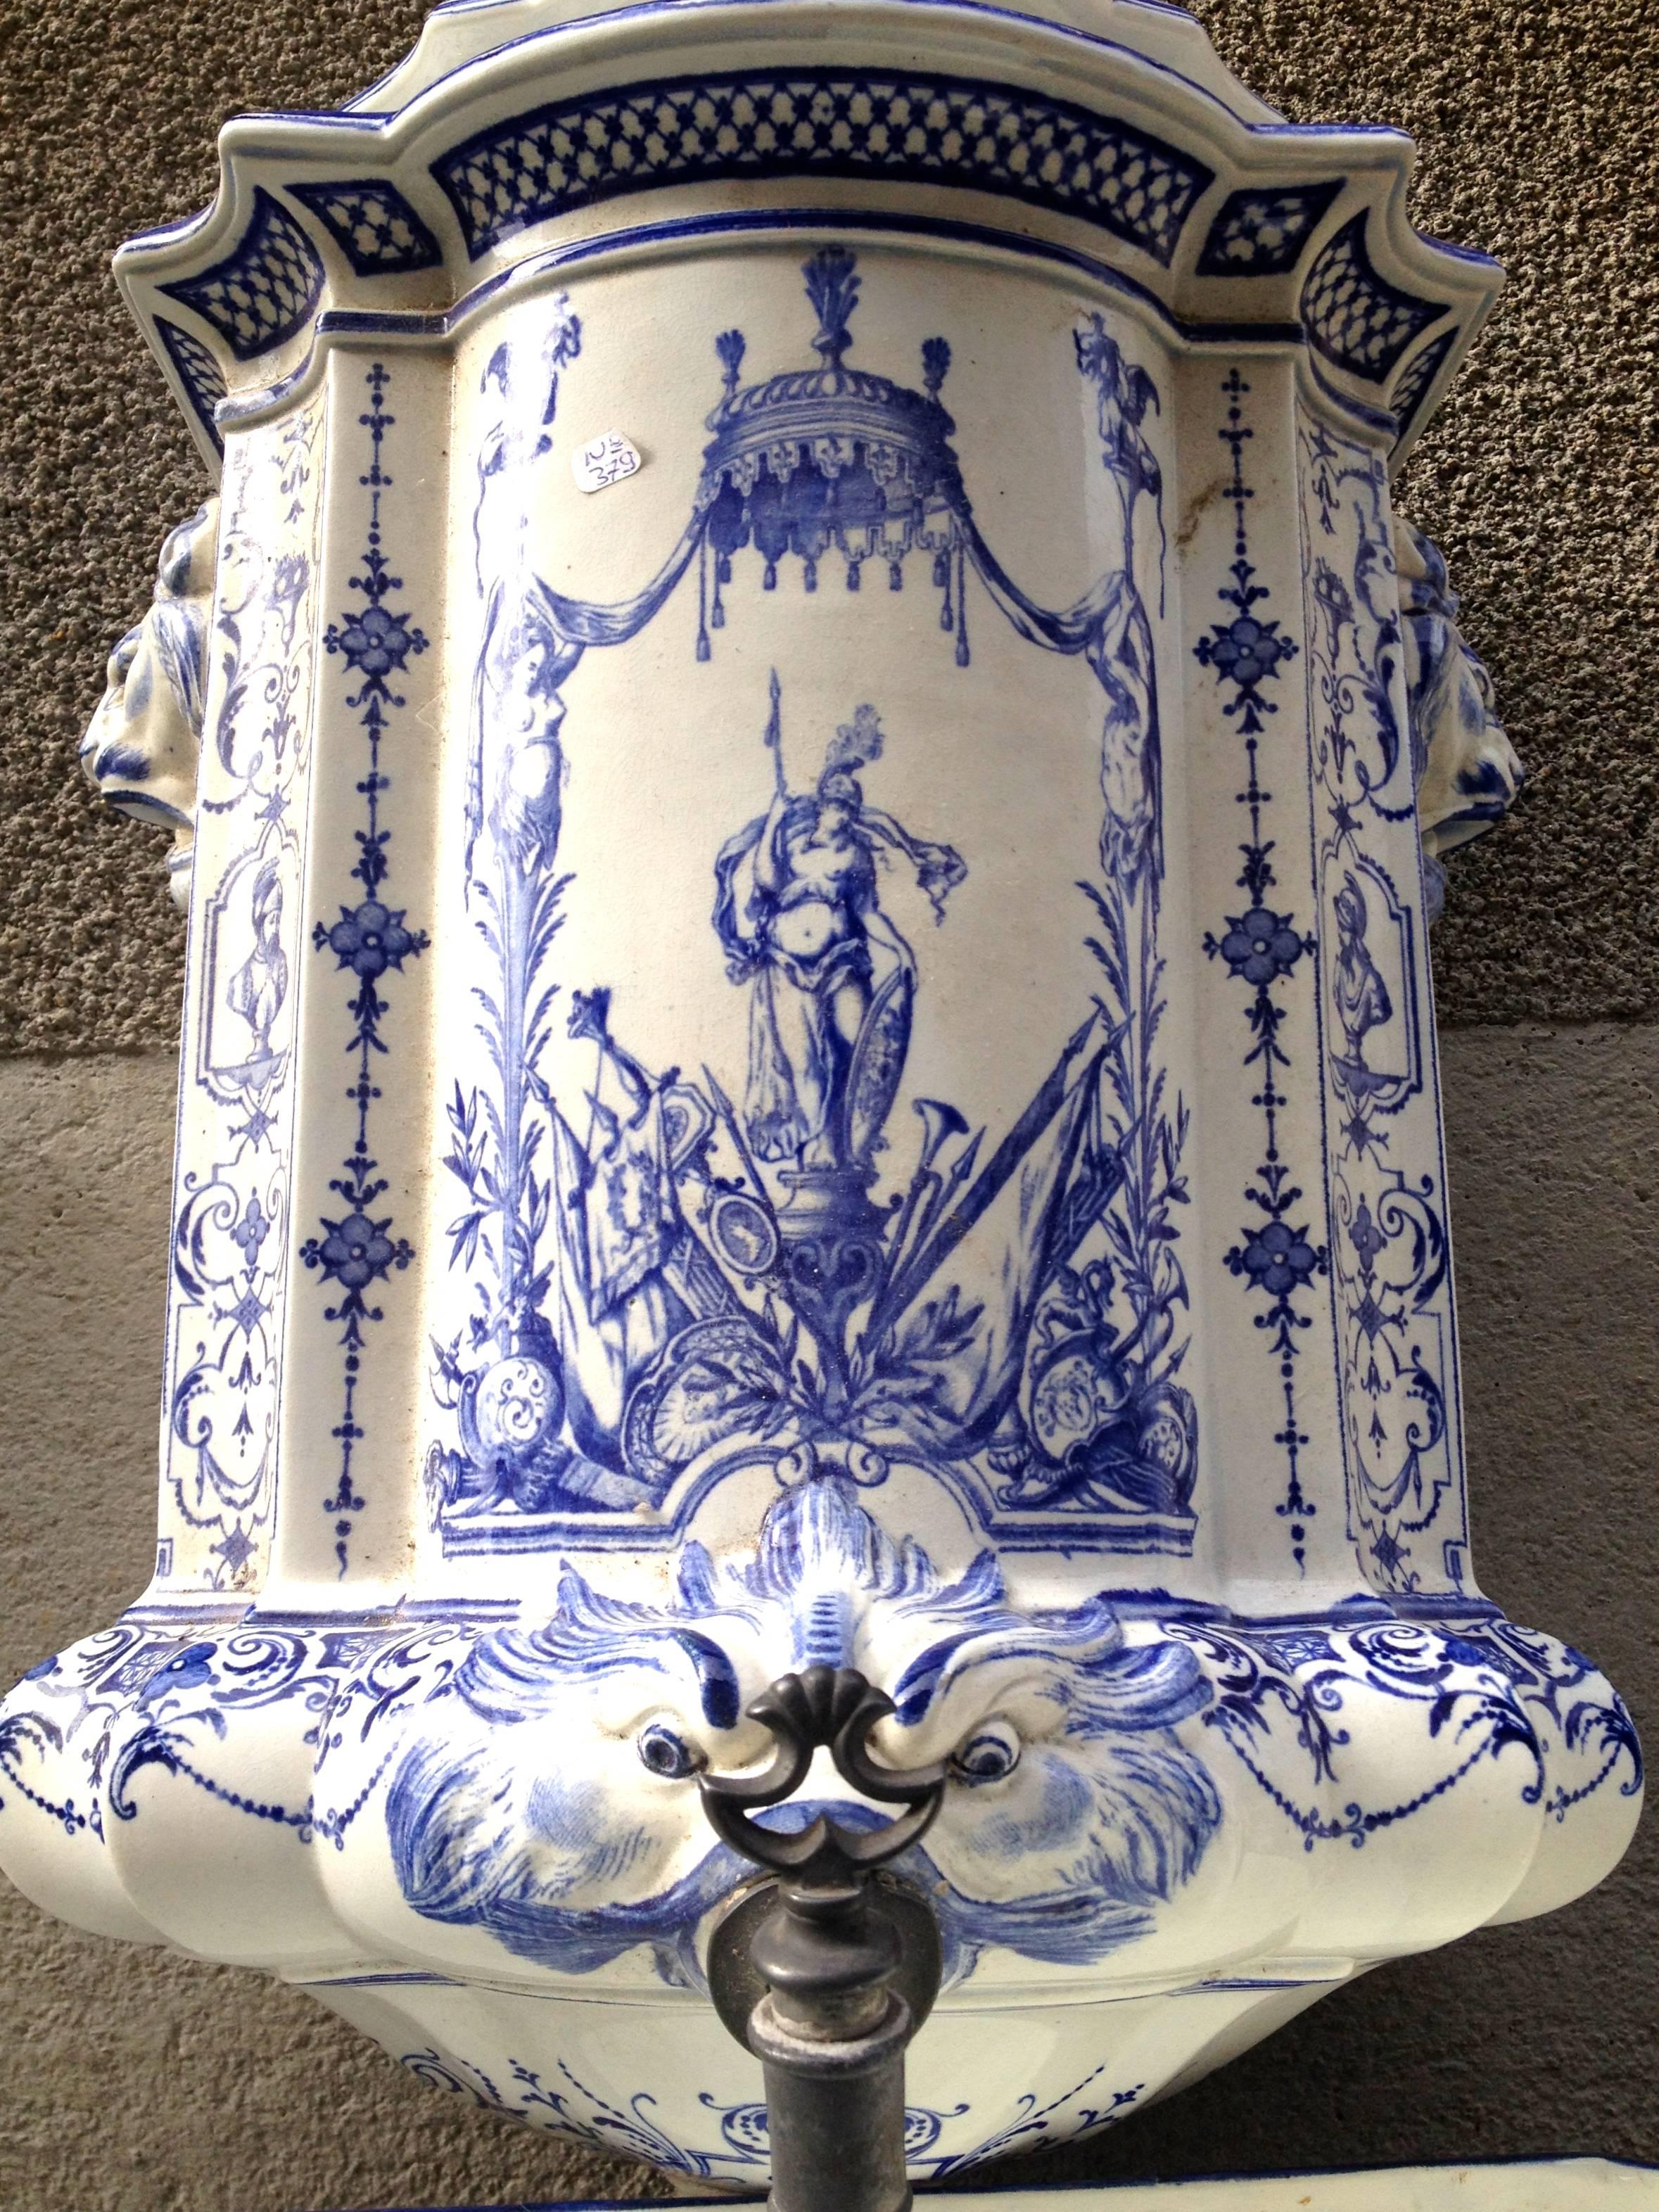 This rare blue and white lavabo in three parts was made by the renowned French faience producer Moustiers, founded in 1738. It is marked "JVC Moustiers" on the underside of the basin, and according to archival research, was made by Antoine